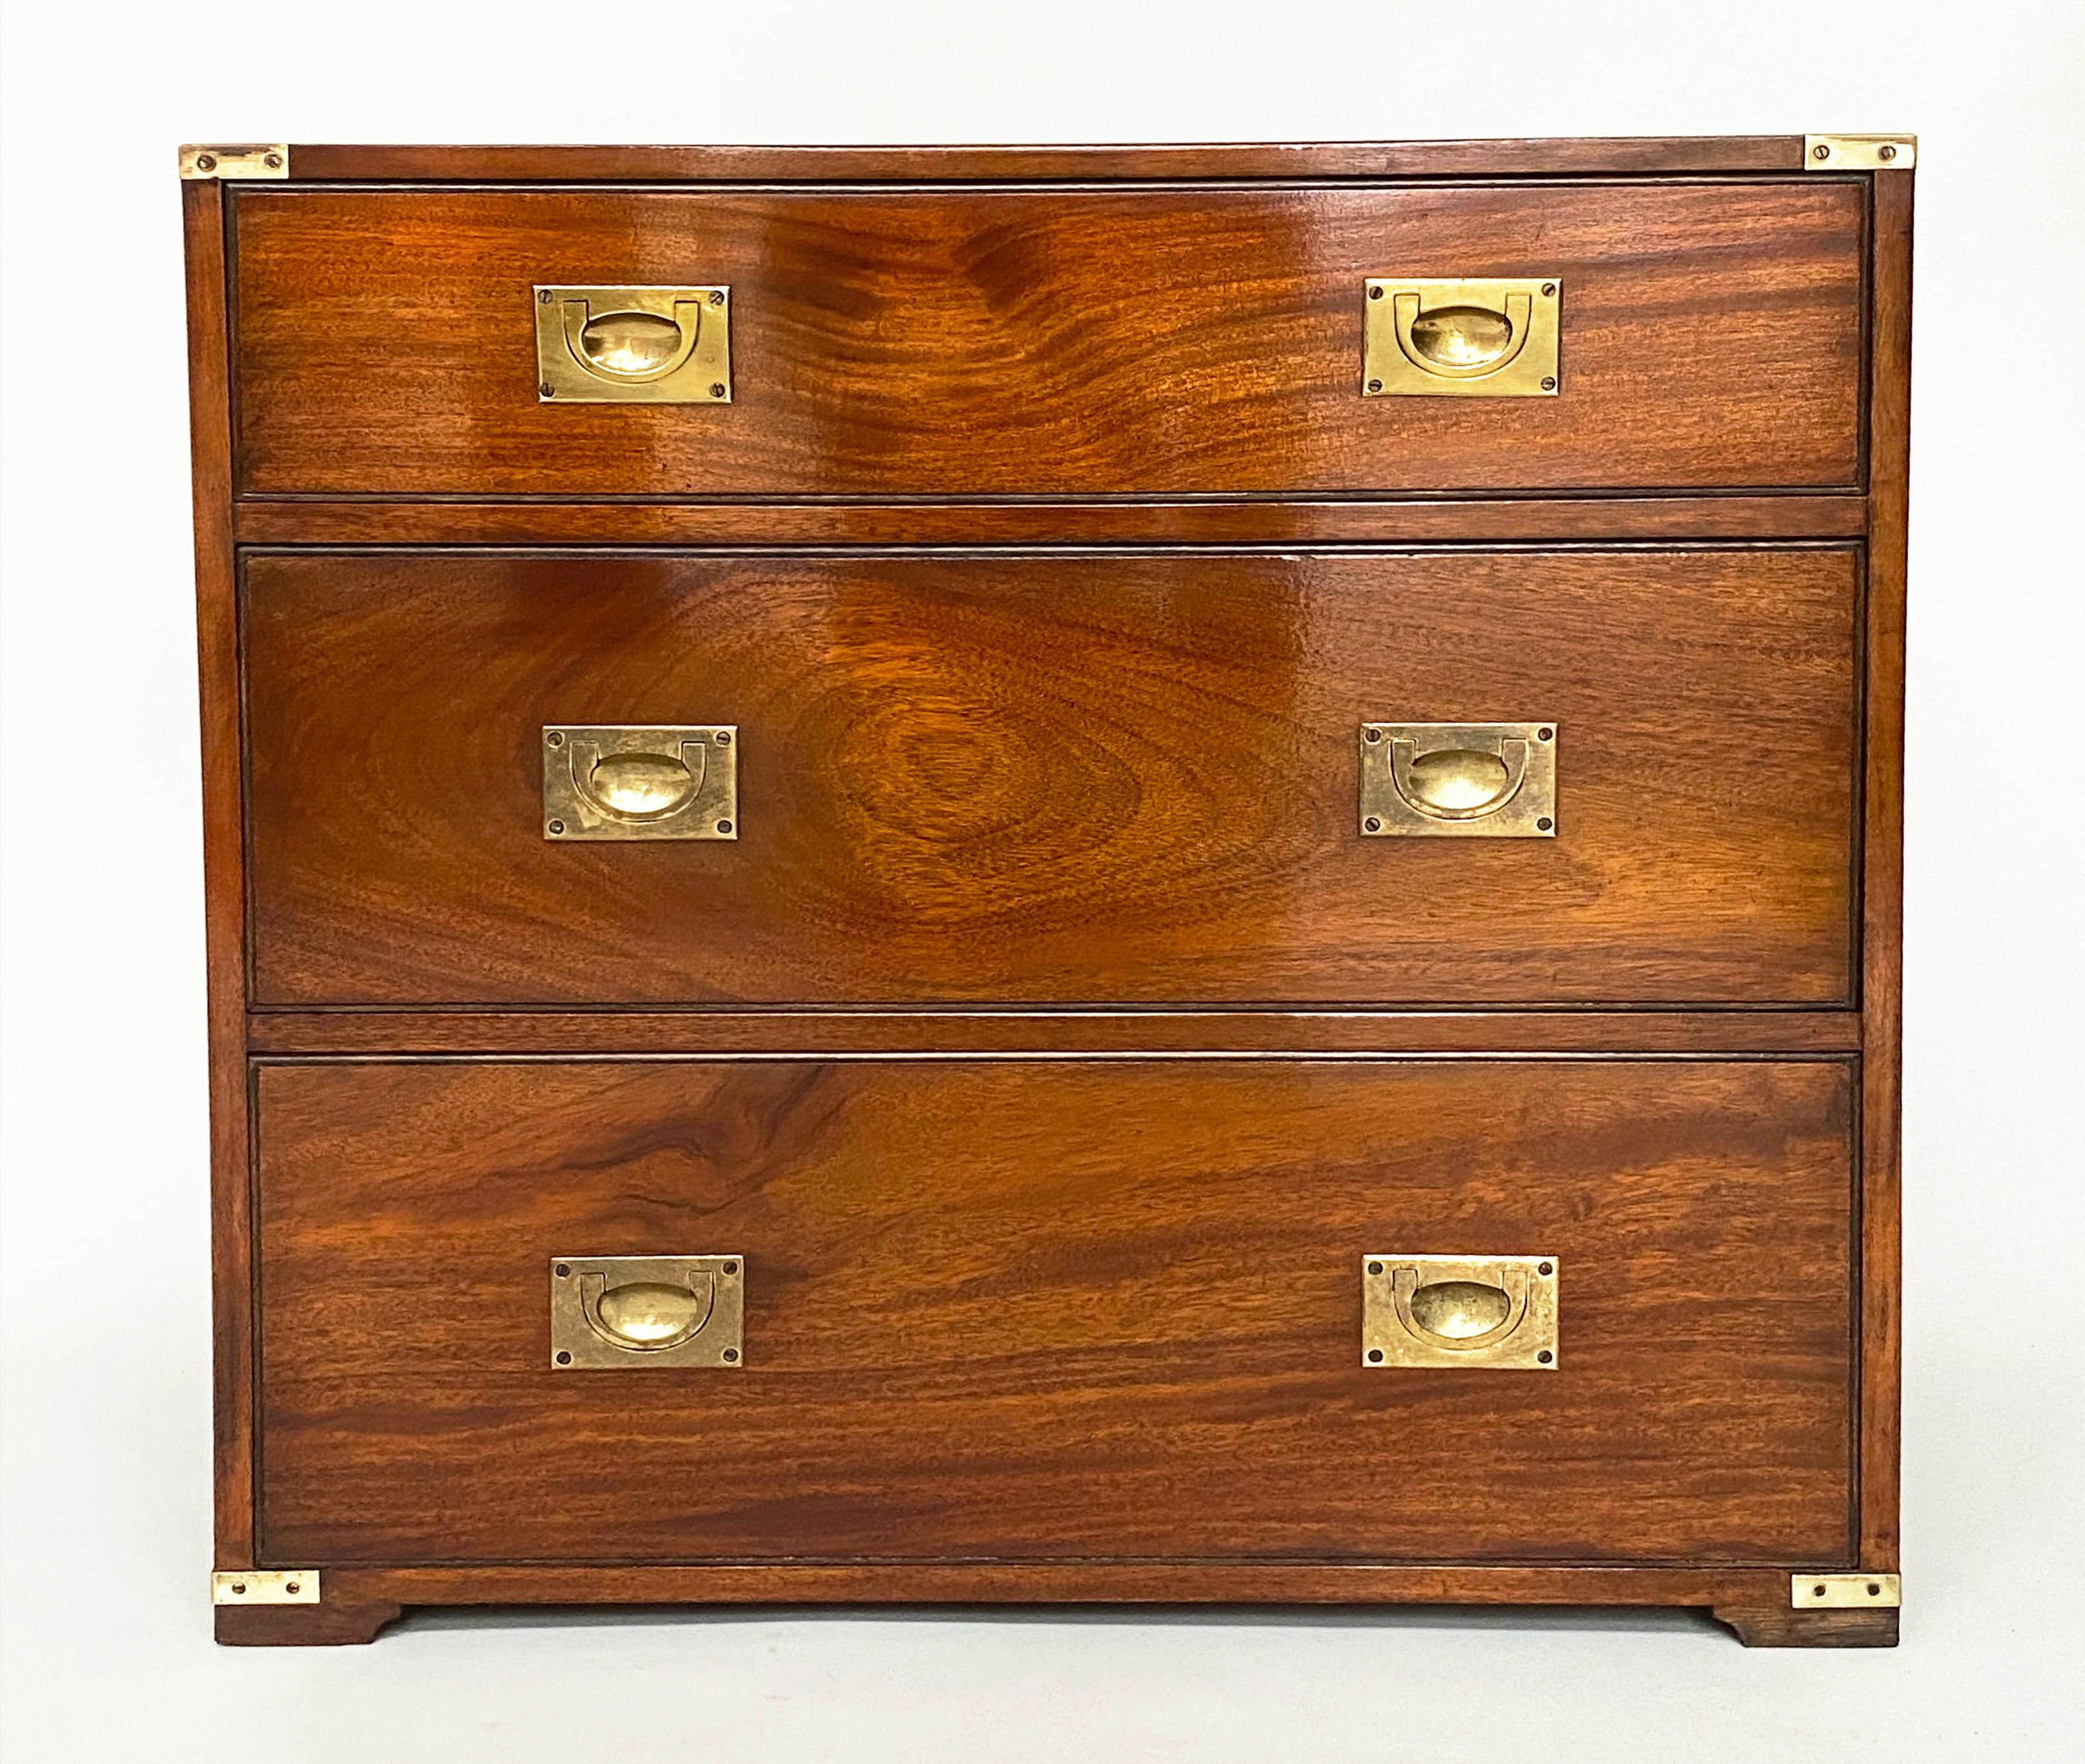 CAMPAIGN STYLE CHESTS, a pair, mahogany and brass bound each with three drawers, 80cm W x 45cm D x - Image 10 of 10